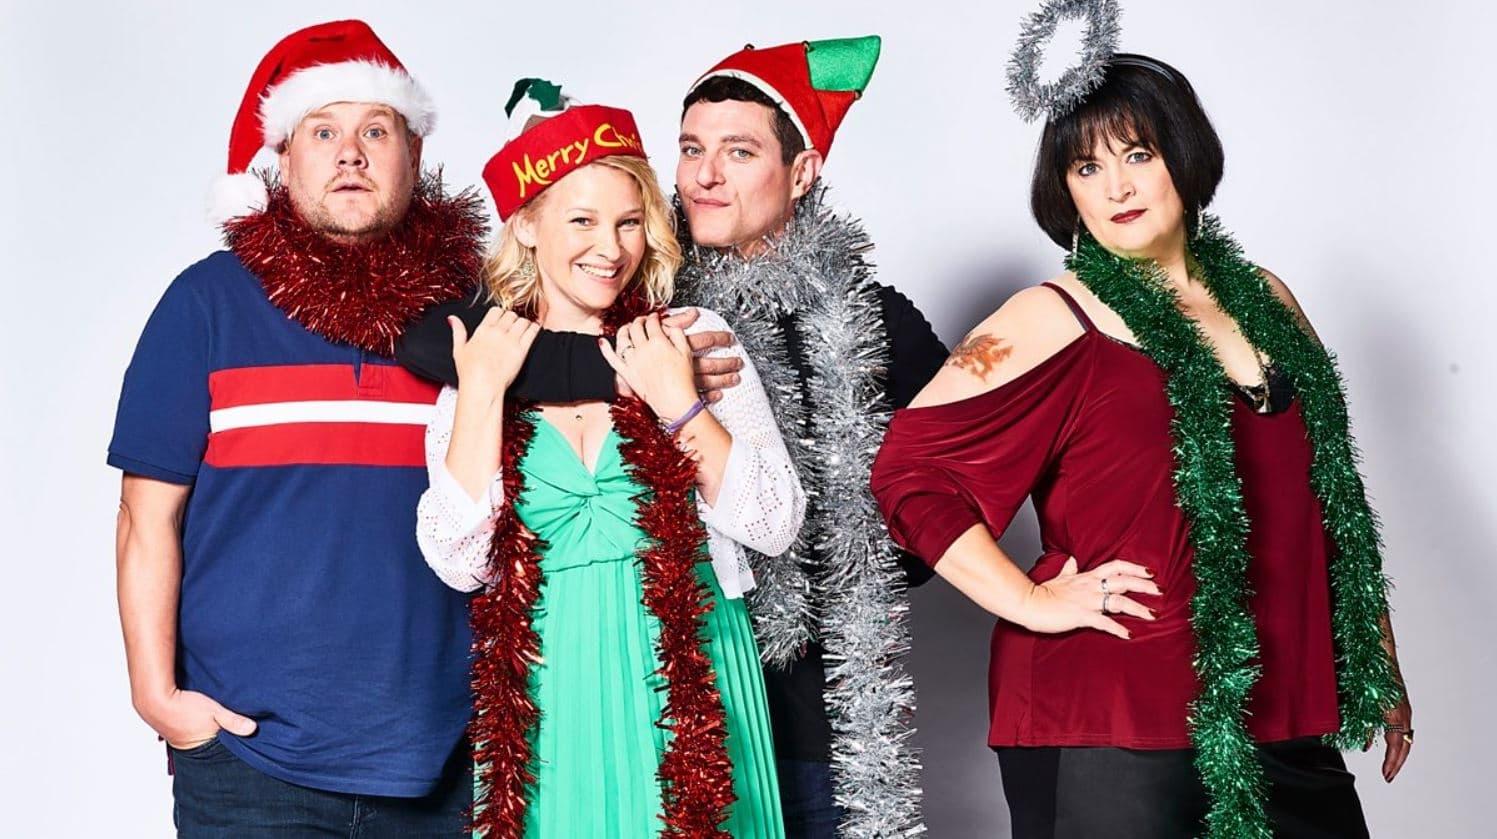 Gavin & Stacey: A Special Christmas backdrop